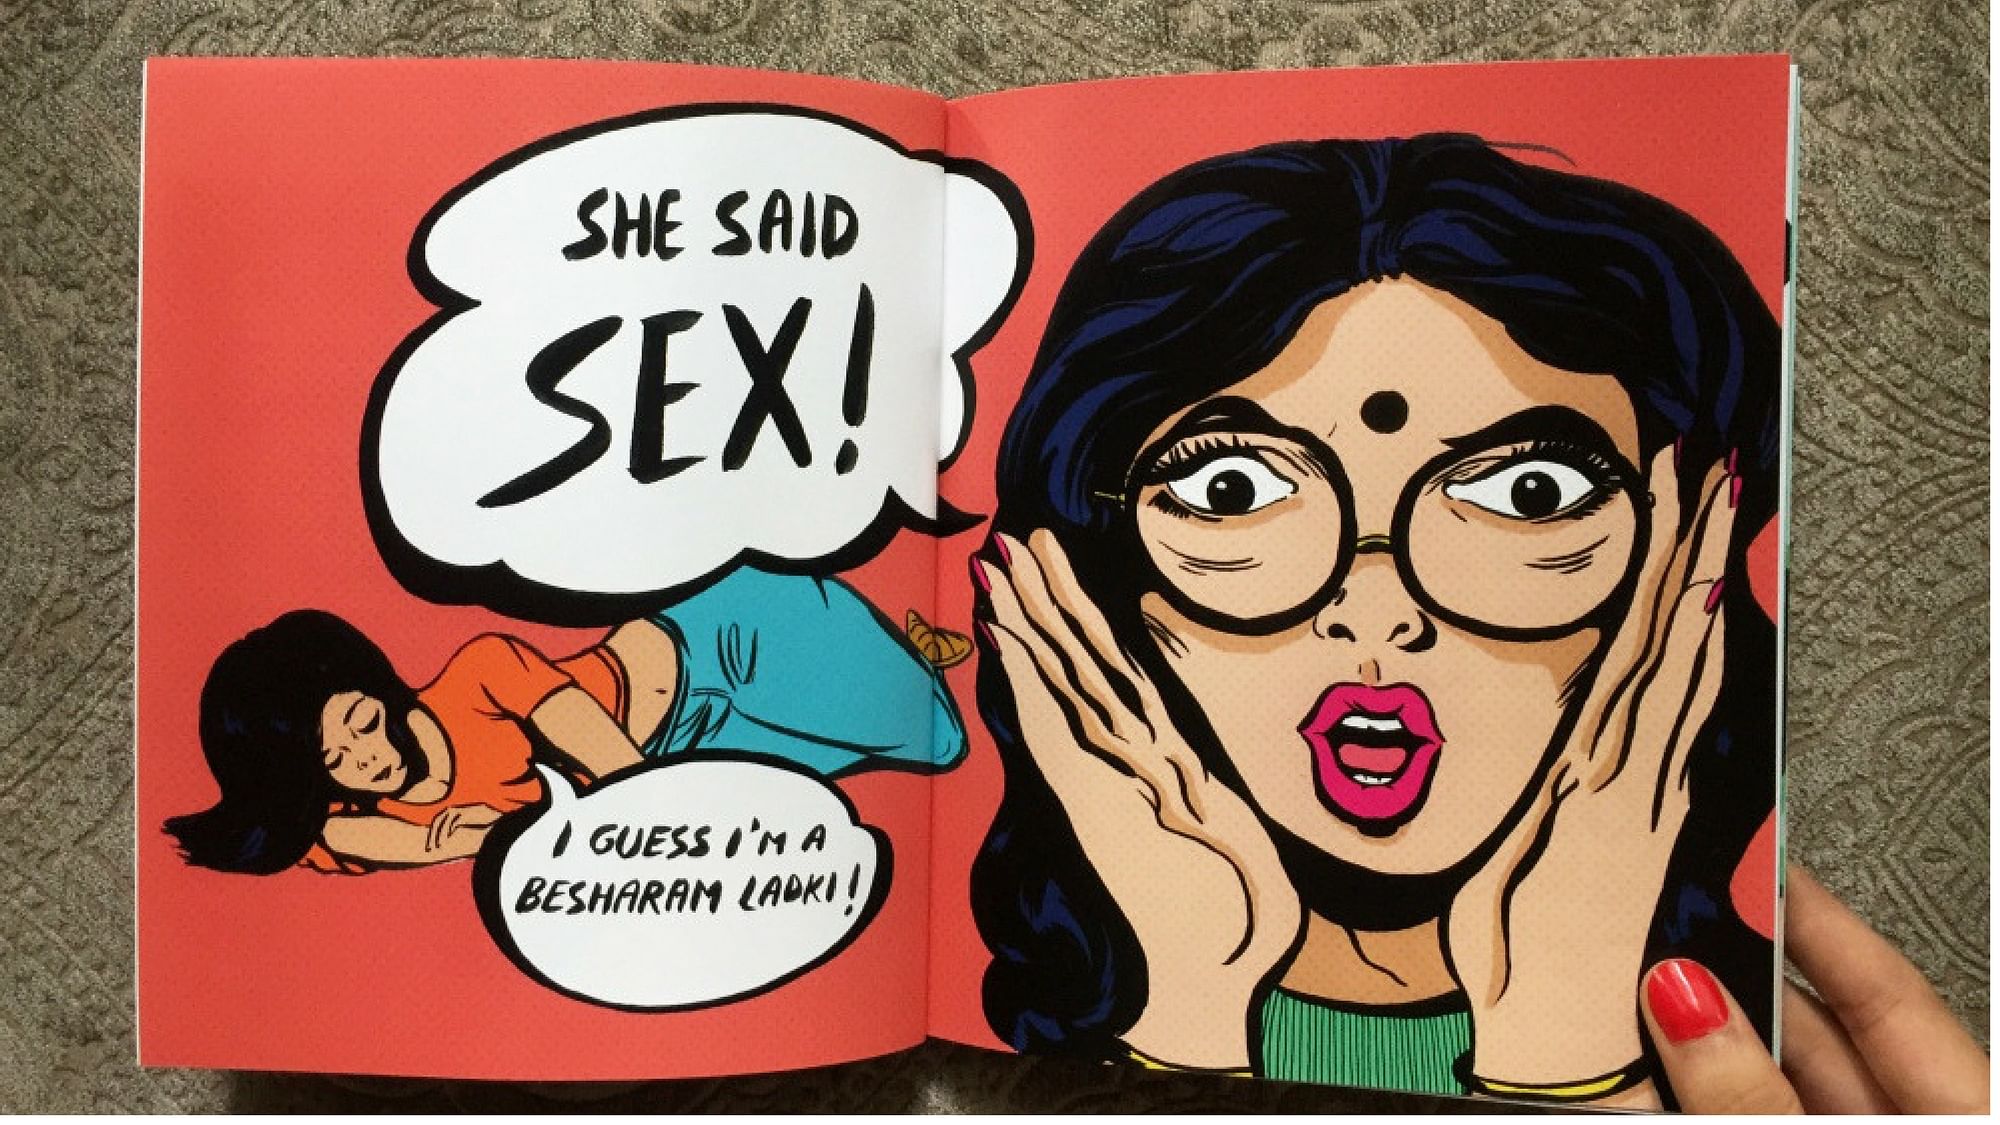 The zine sheds light on challenges that 21st century Indian women face, by placing Kunti, Gandhari and Draupadi in a modern context.